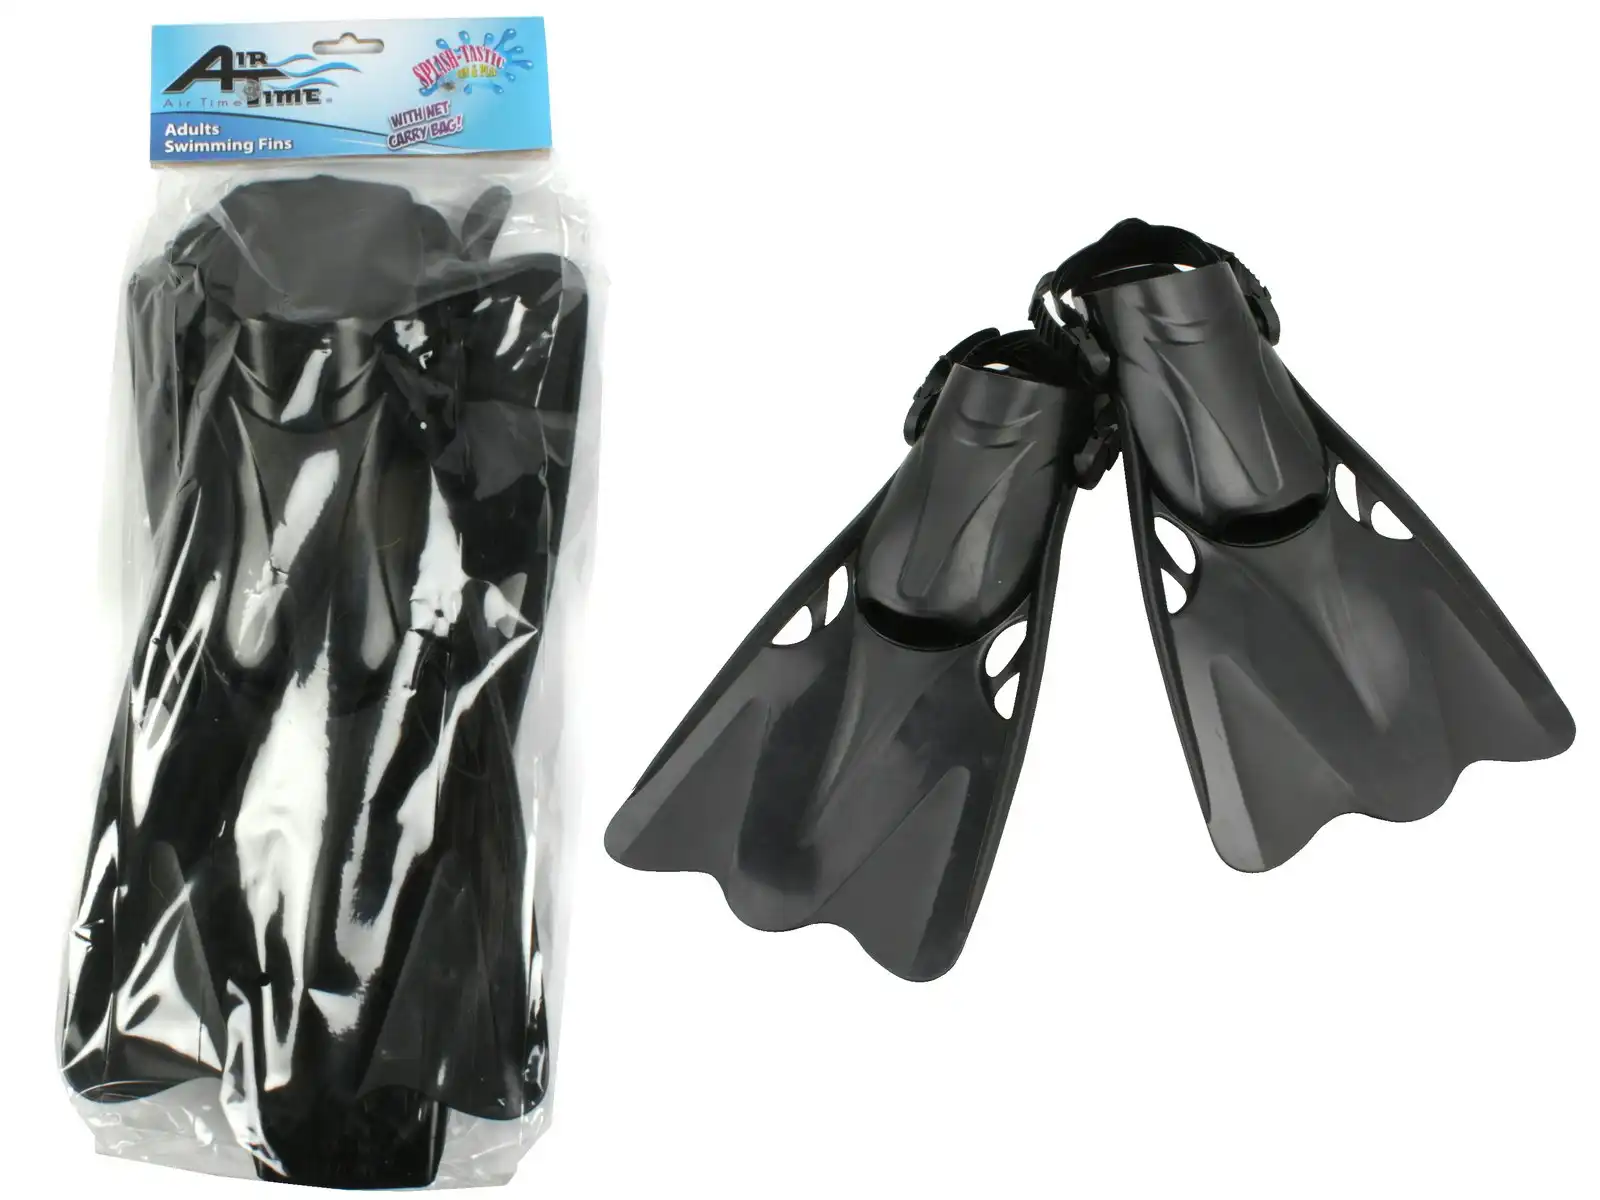 Airtime Swimming Fins Adult Pool/Beach Snorkeling/Scuba Diving Equipment Black